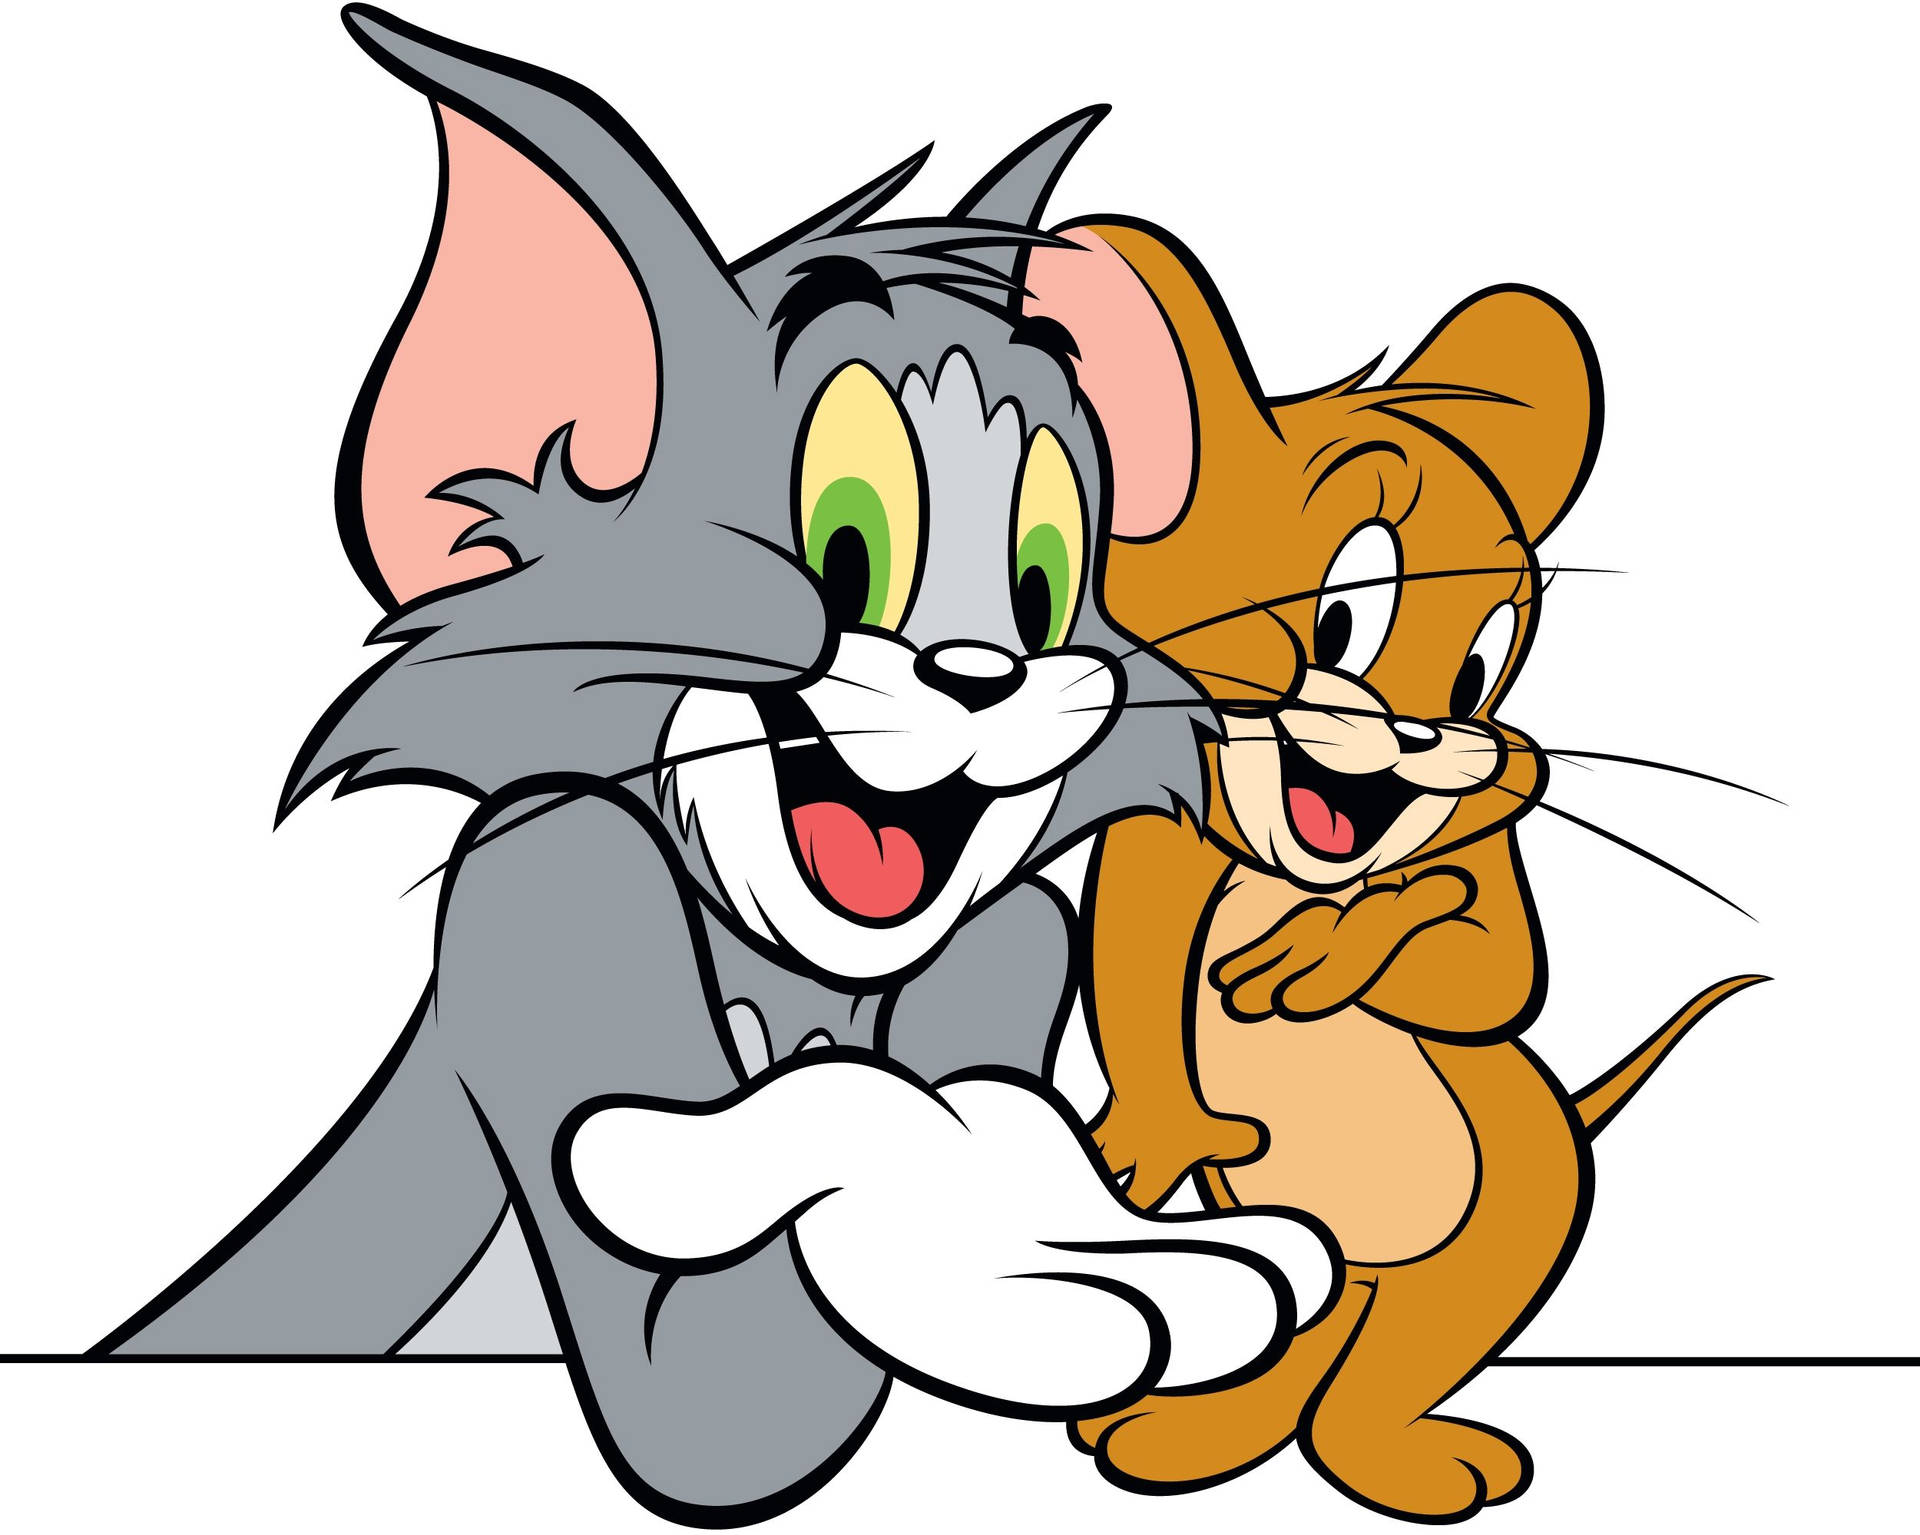 Best Tom and jerry iPhone Tom and Jerry Cute HD phone wallpaper  Pxfuel